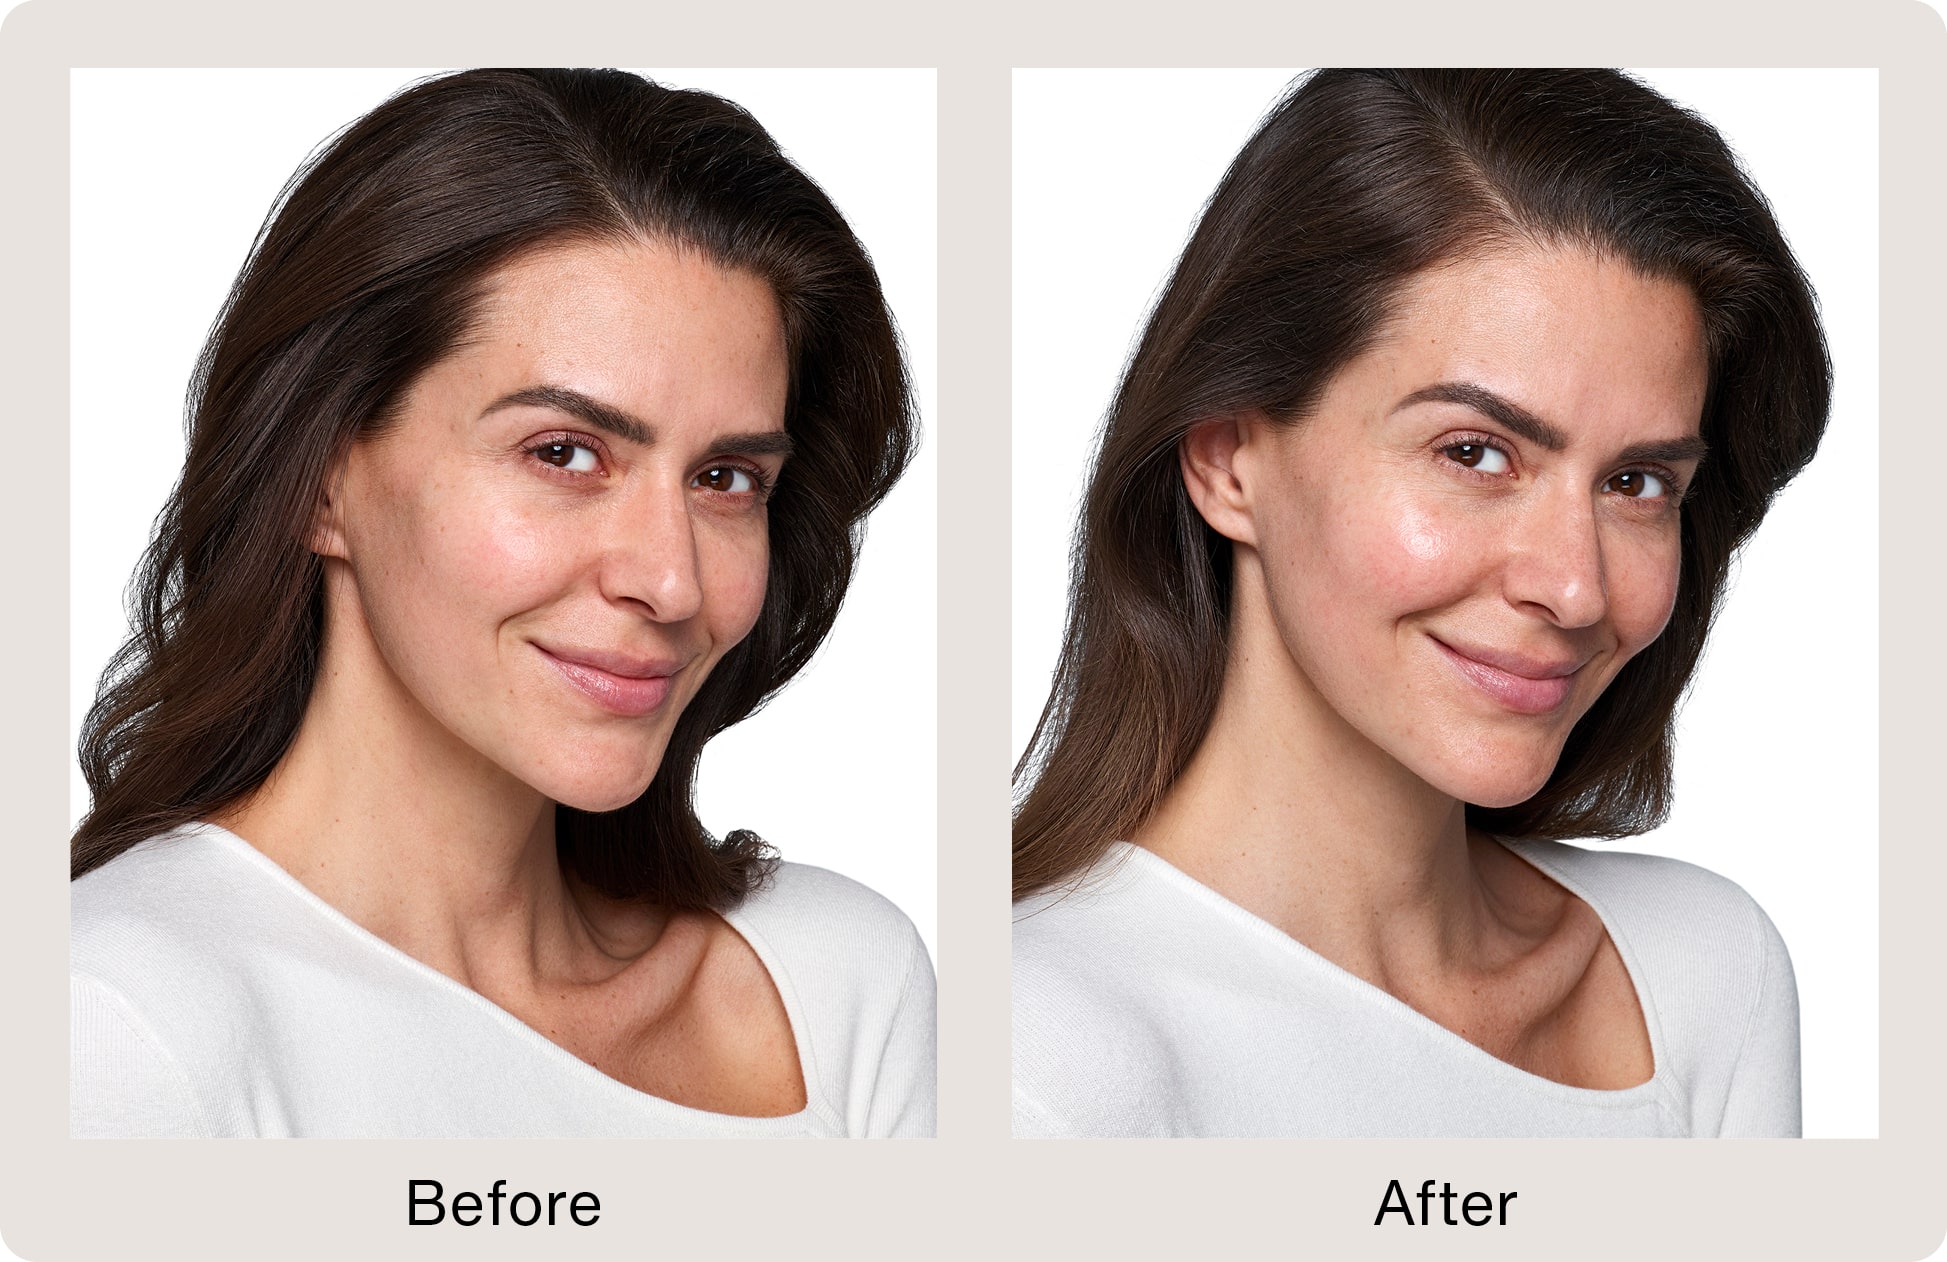 Janina treated by Skinvive - before and after photos